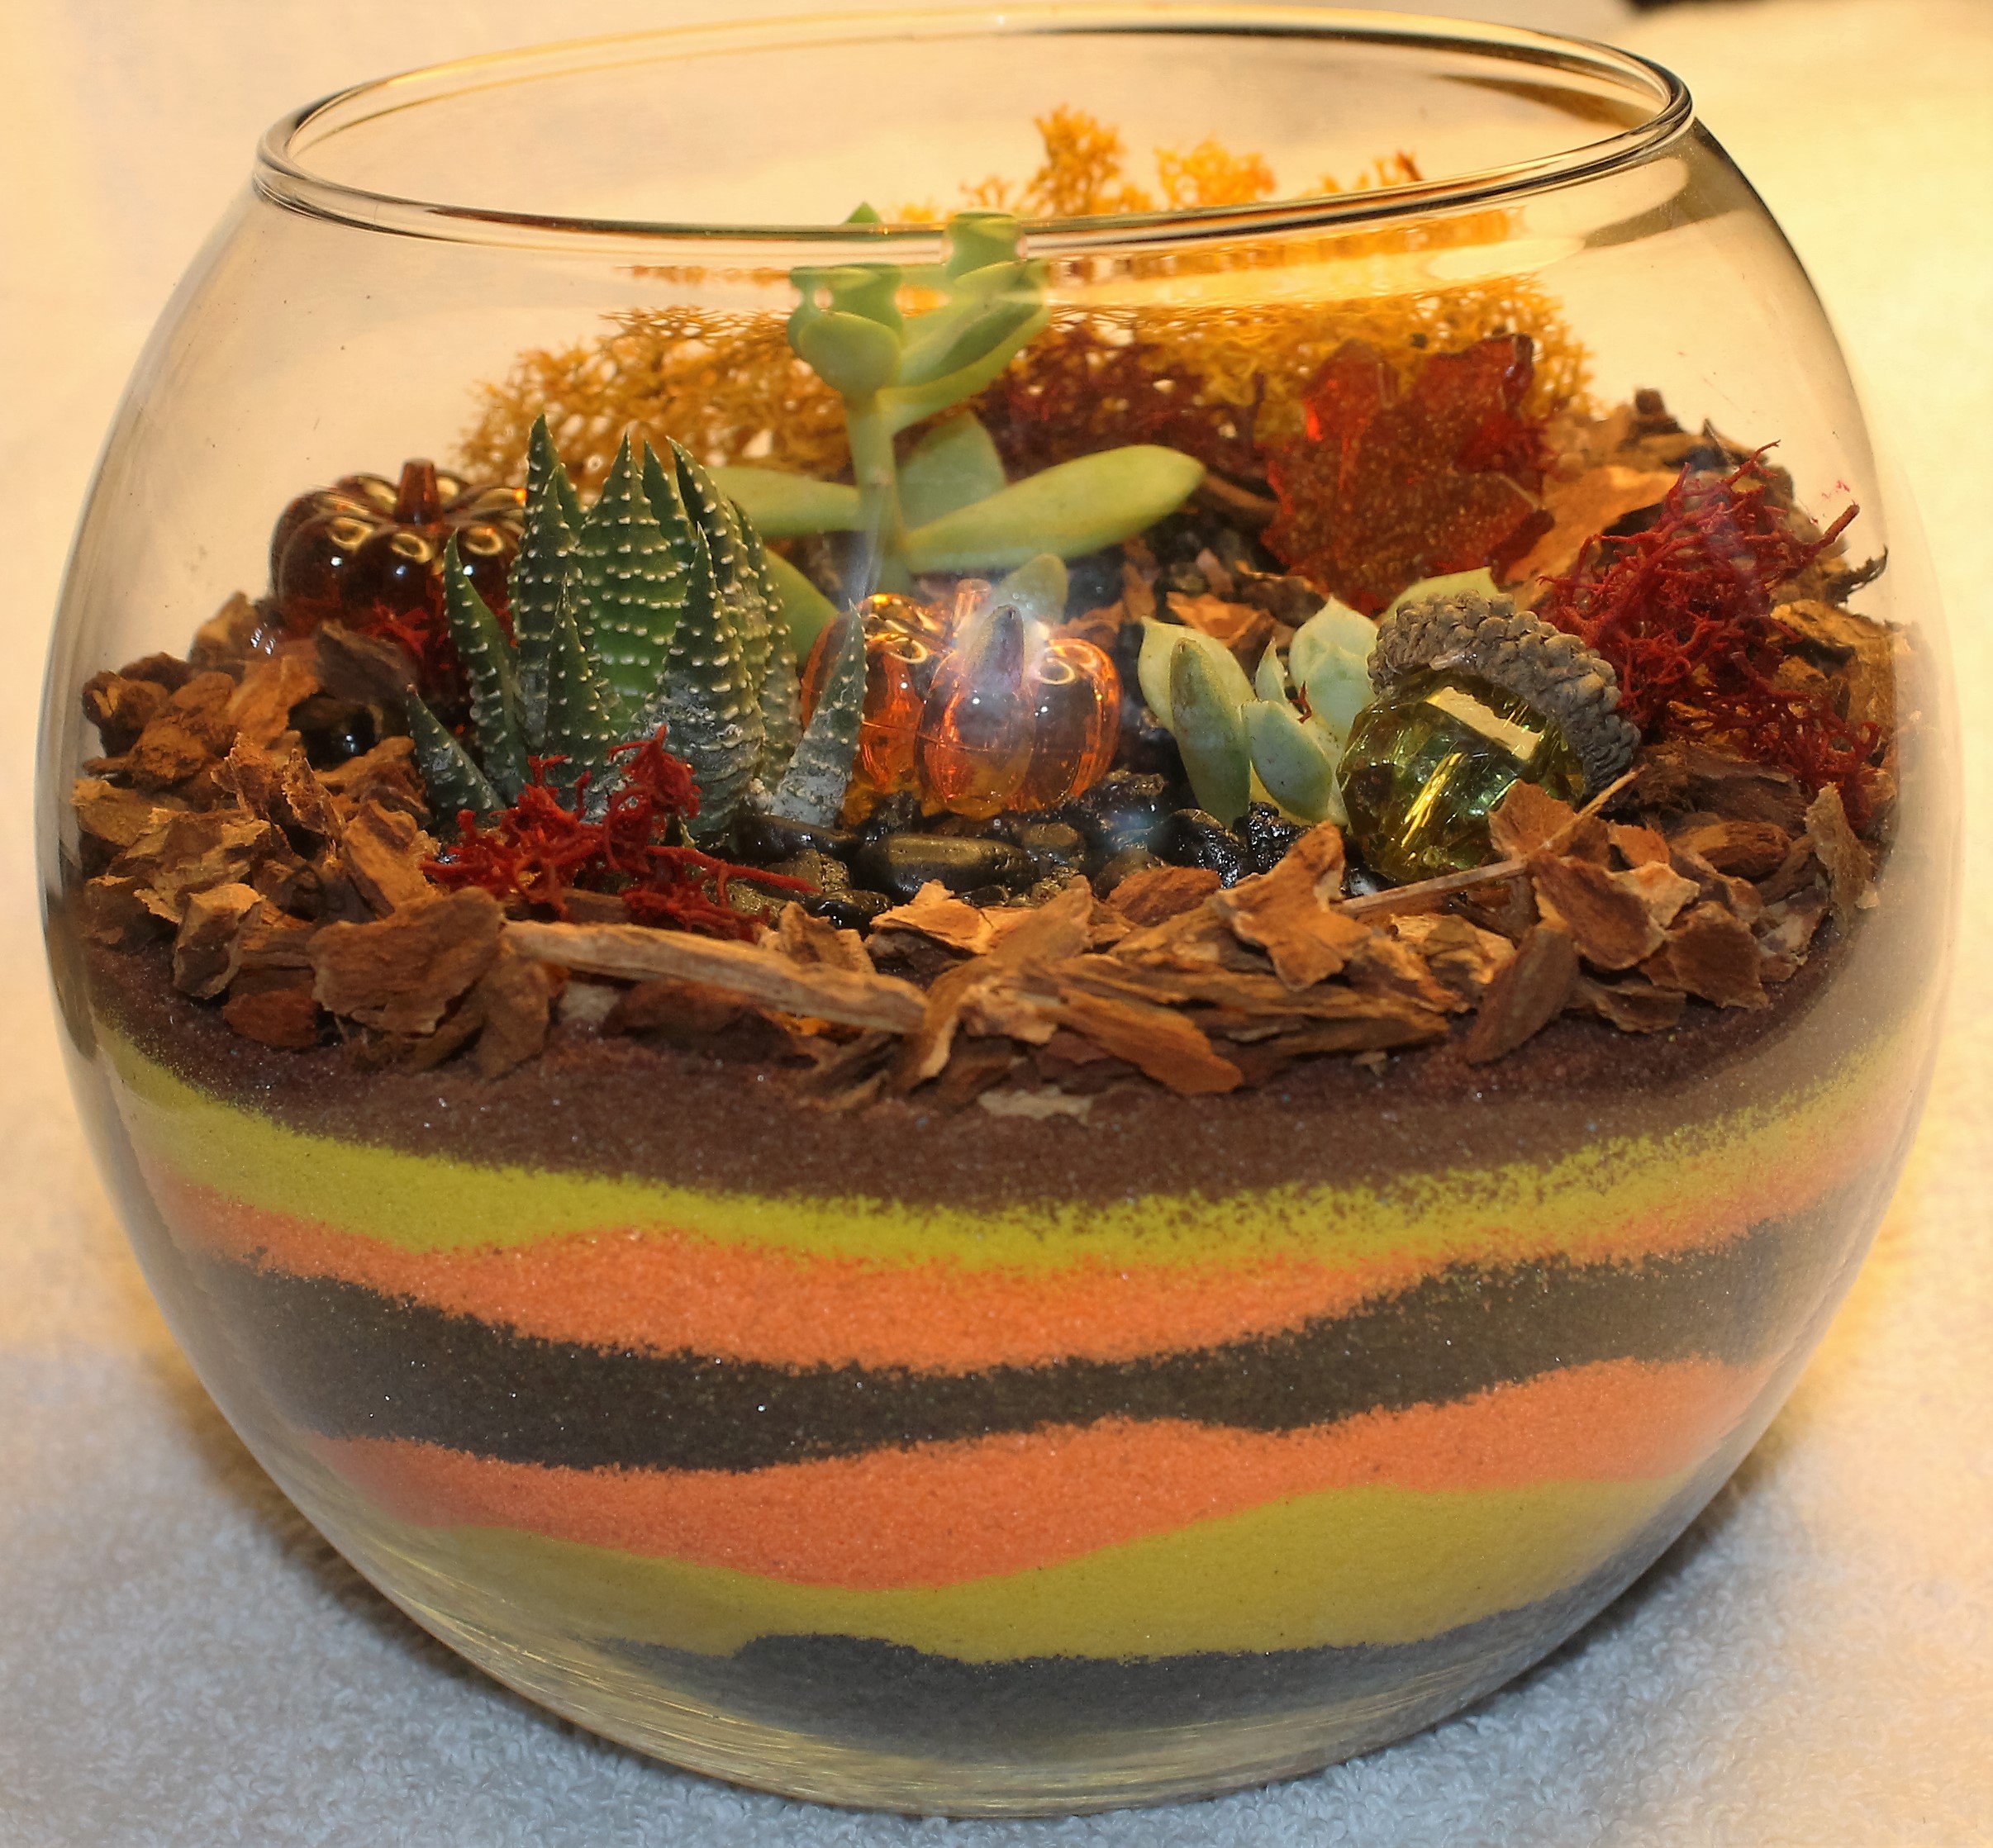 A Fall Sand Art plant nite project by Yaymaker